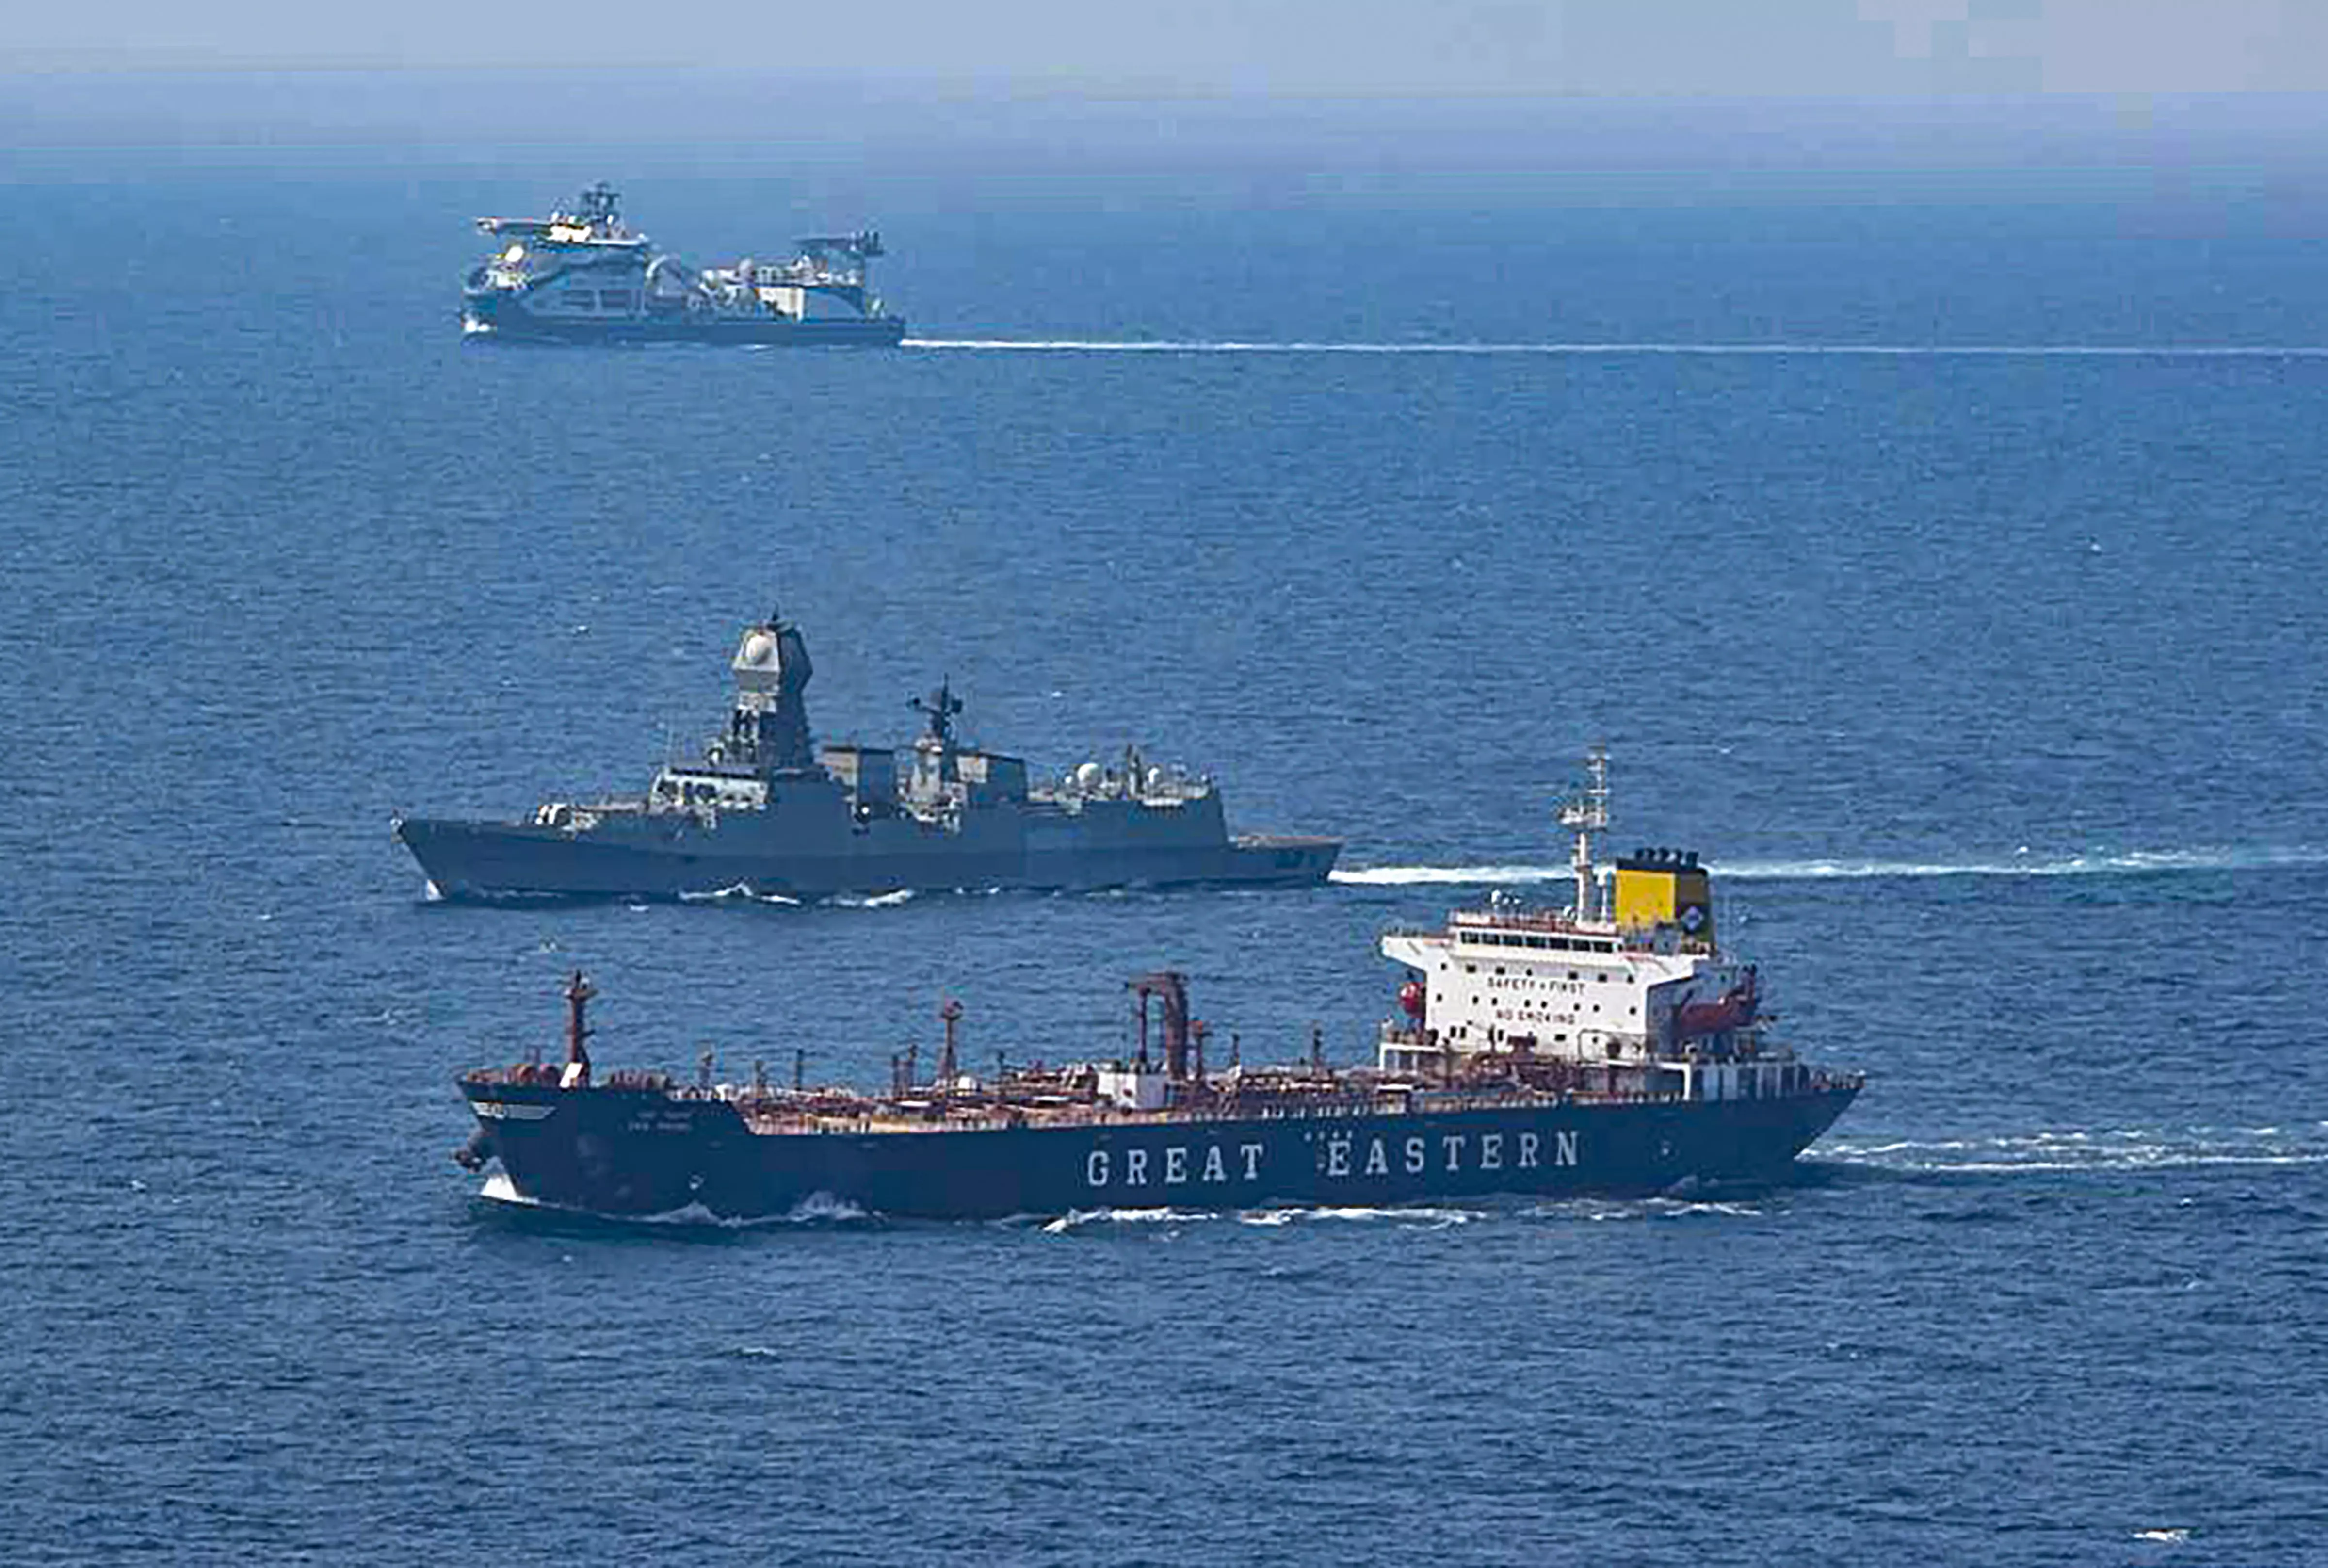 Indian Navy launches hunt for pirates involved in hijacking attempt